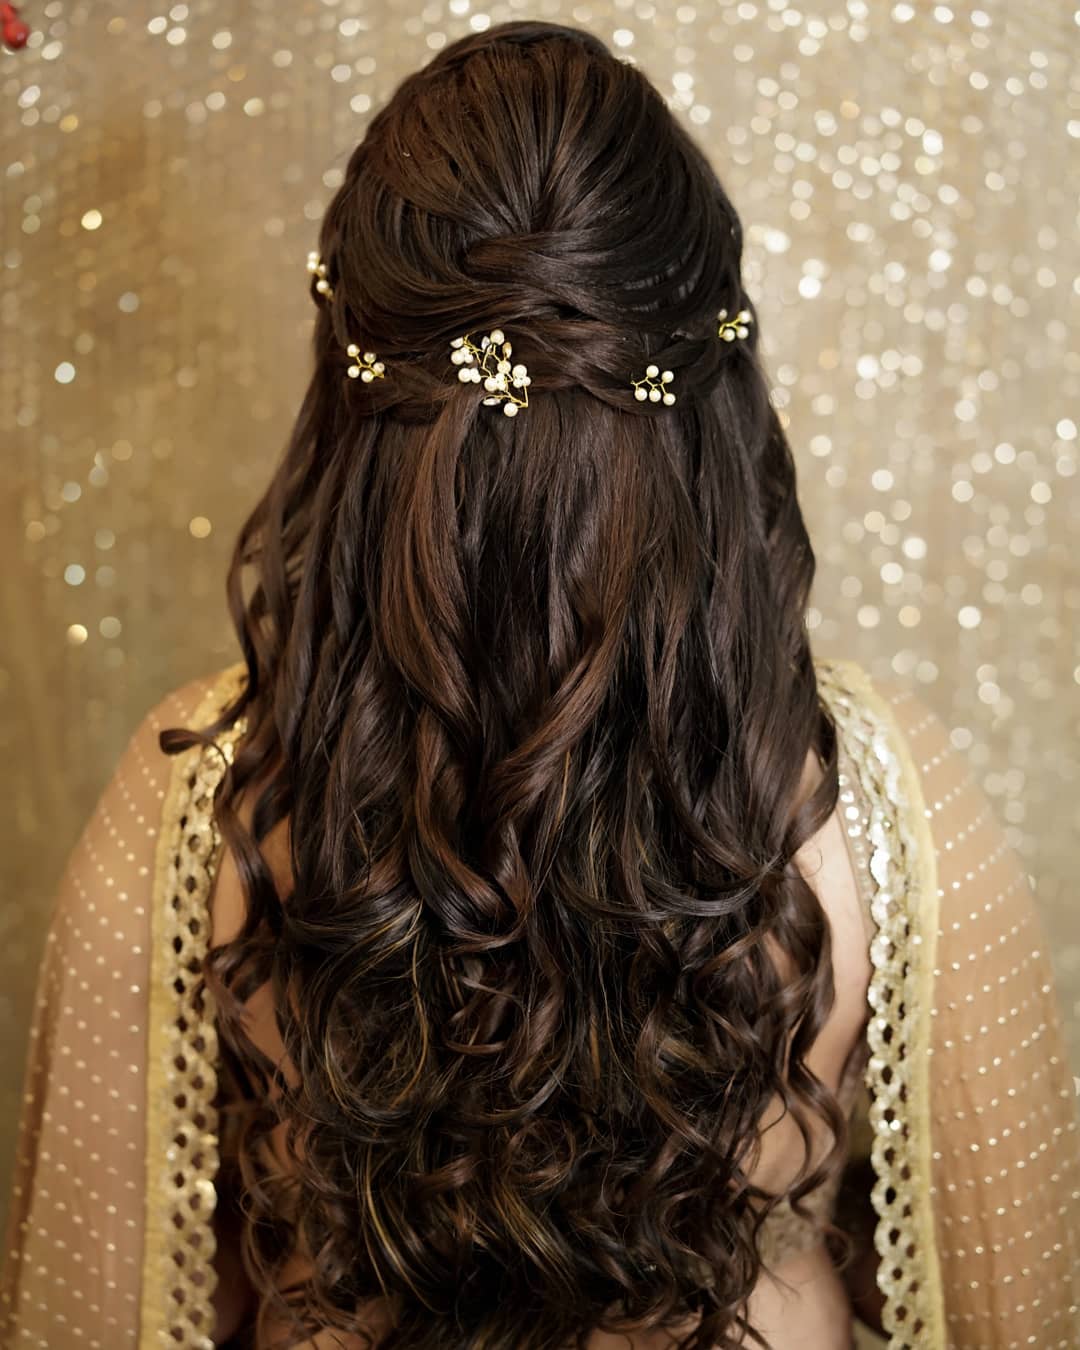 Wedding Hairstyles | Gallery posted by Cassy Dorr | Lemon8